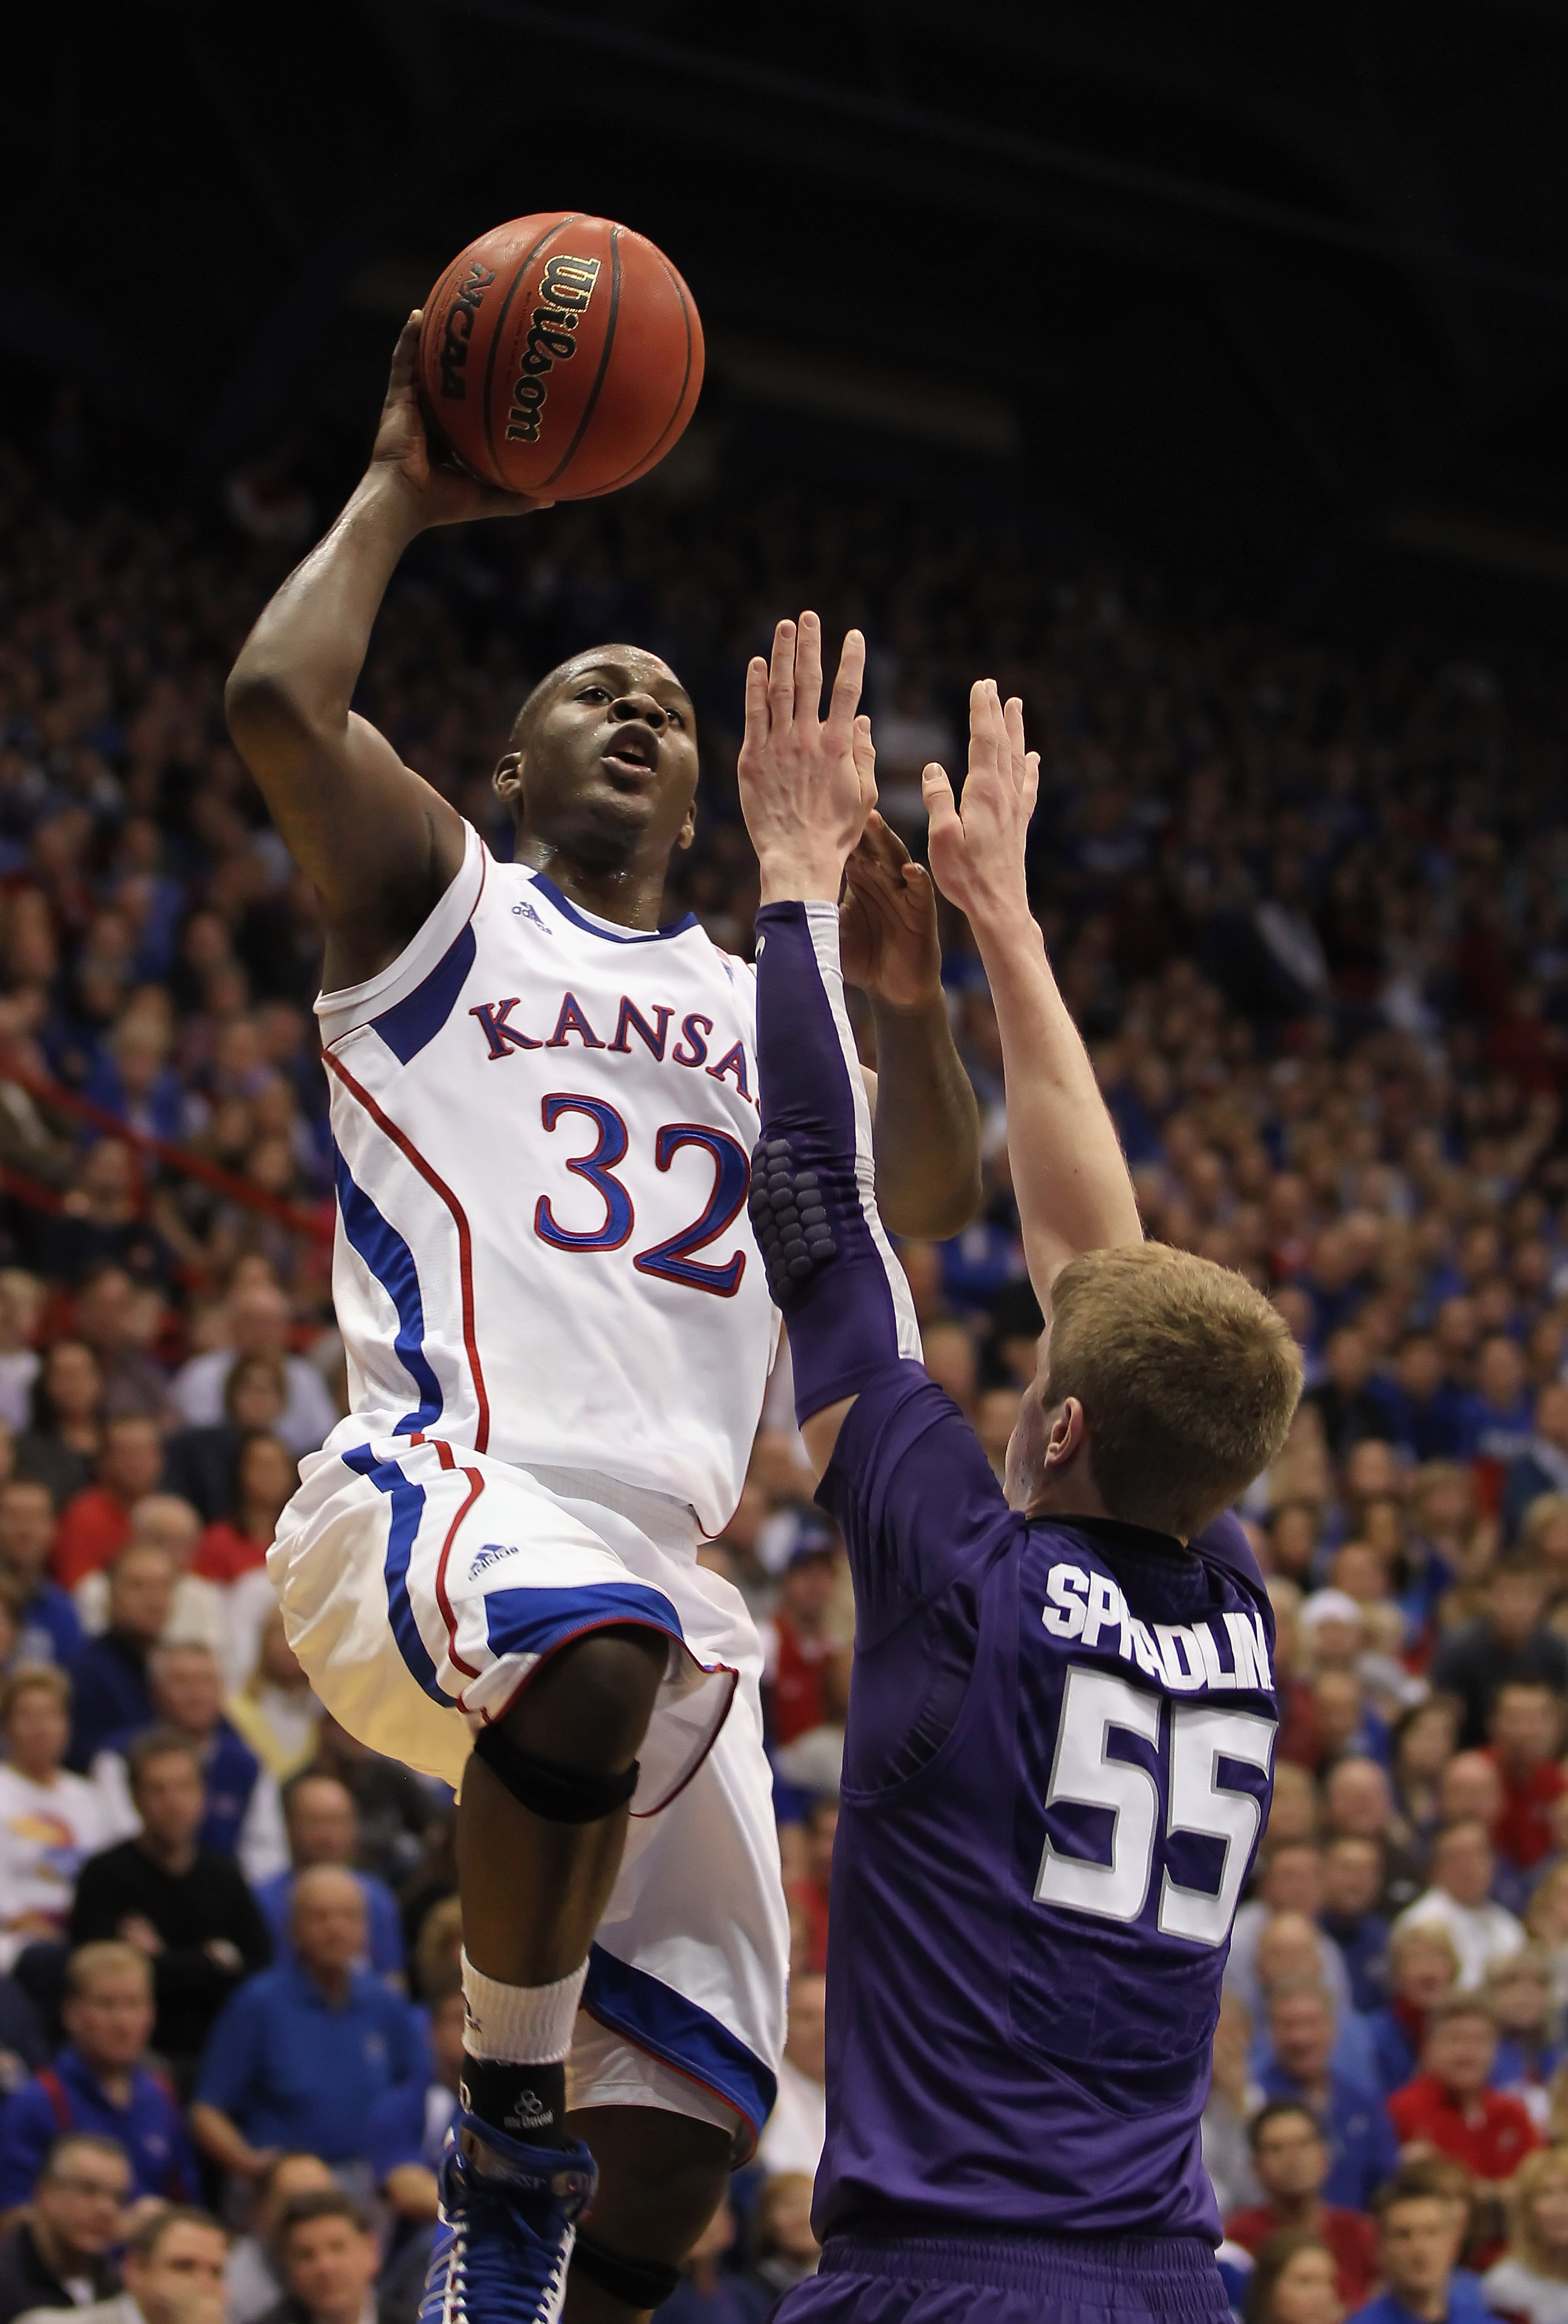 LAWRENCE, KS - JANUARY 29:  Josh Selby #32 of the Kansas Jayhawks shoots over Will Spradling #55 of the Kansas State Wildcats for a rebound during the game on January 29, 2011 at Allen Fieldhouse in Lawrence, Kansas.  (Photo by Jamie Squire/Getty Images)